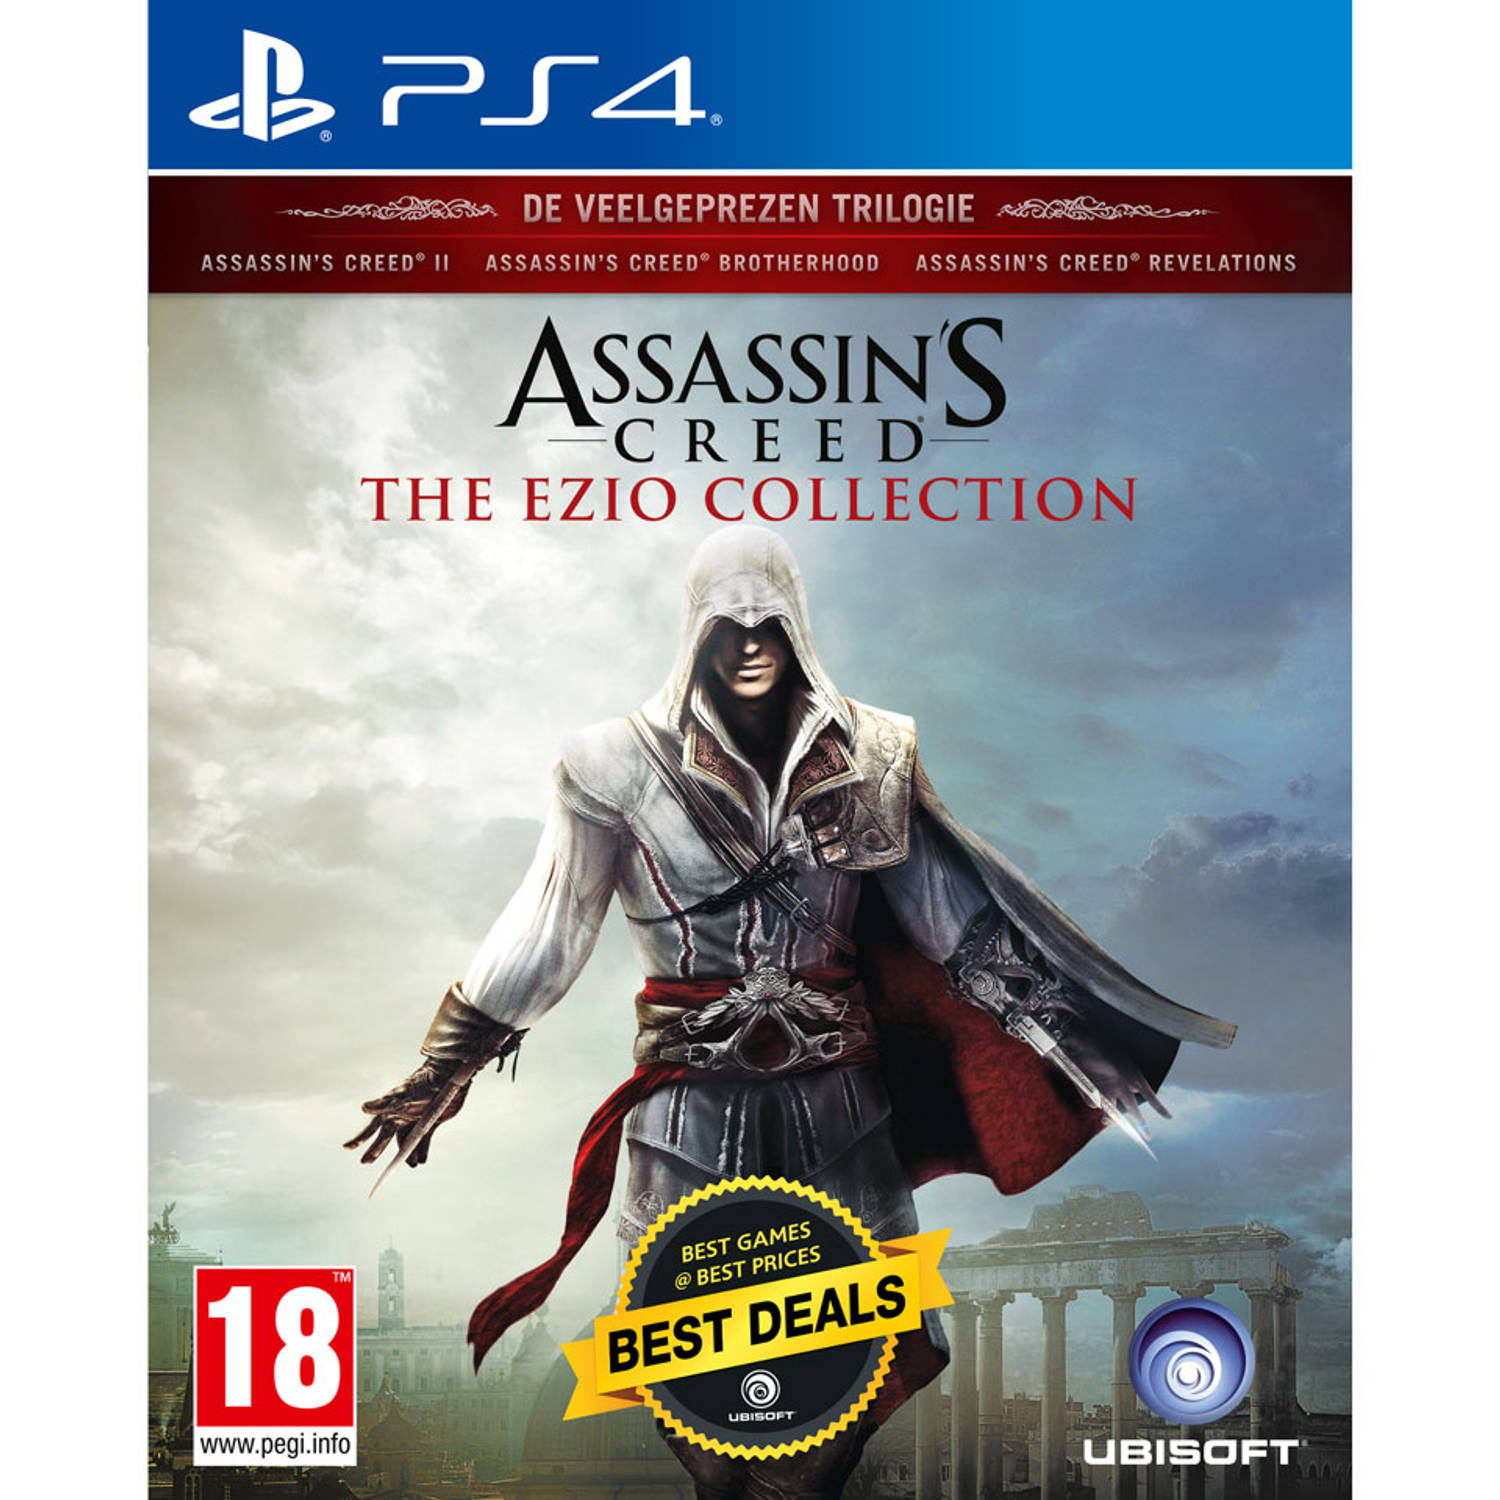 Assassins Creed - The Ezio Collection - PS4